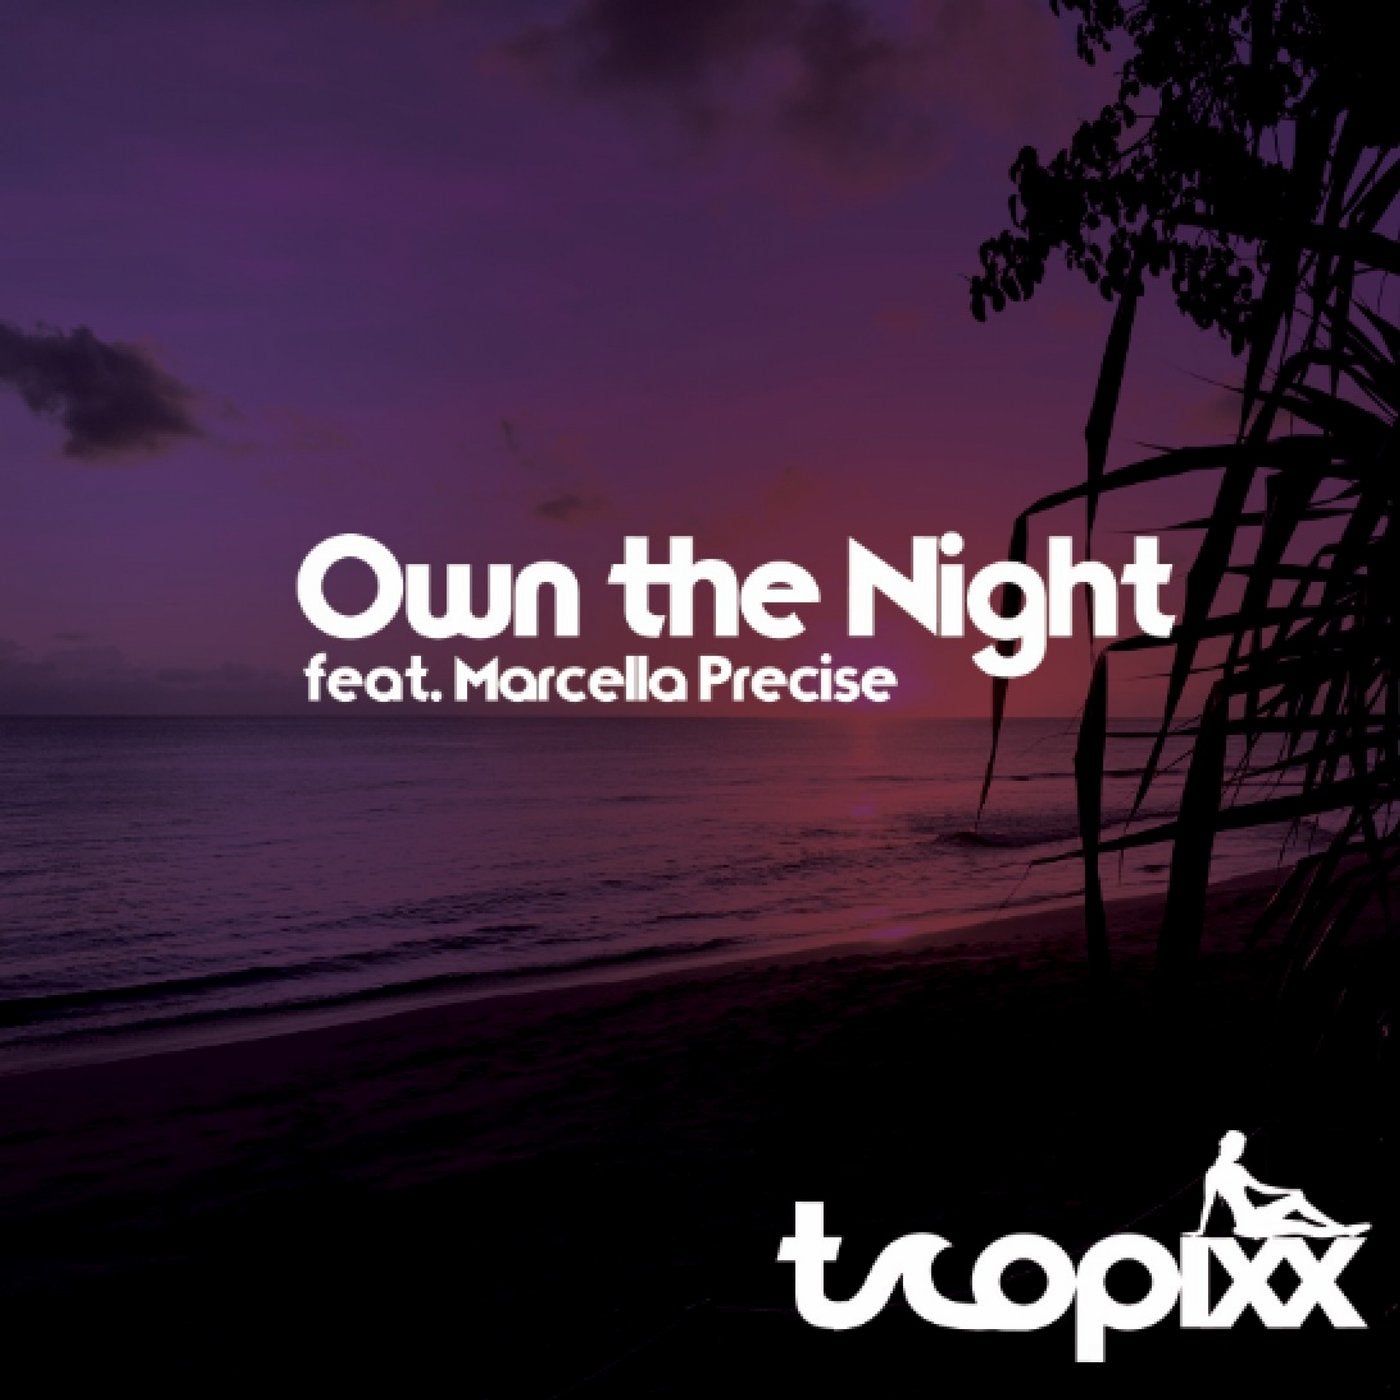 Own the Night (feat. Marcella Precise)